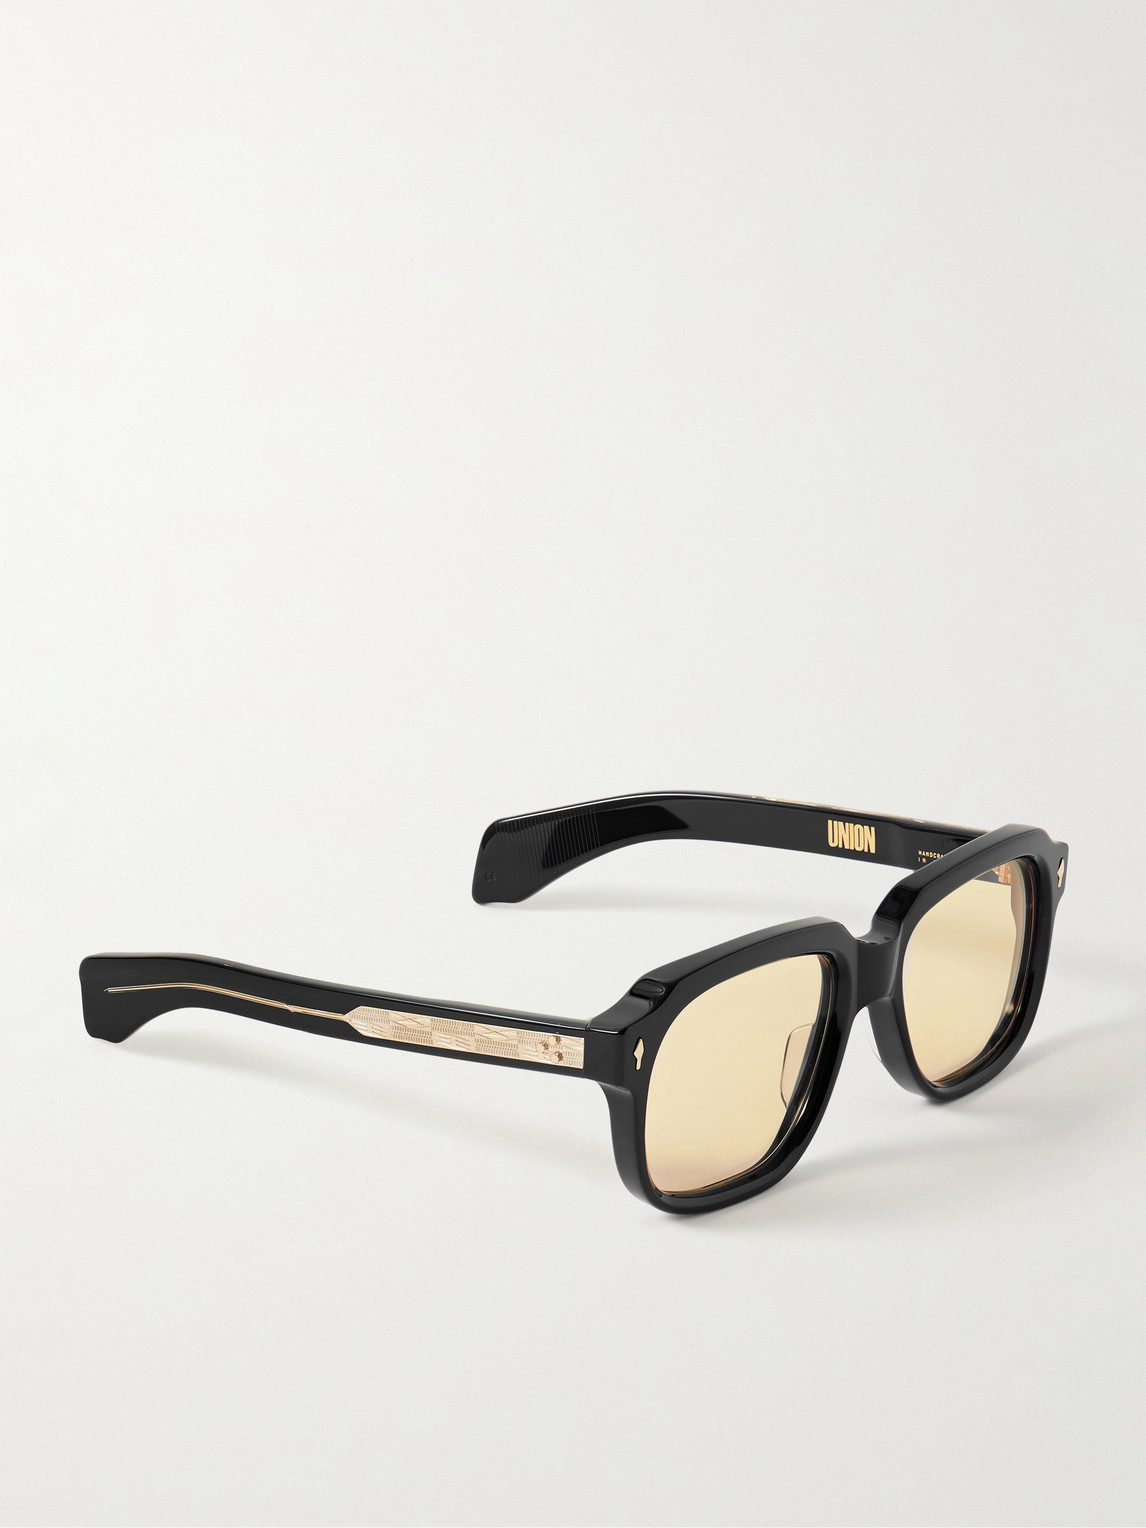 Shop Jacques Marie Mage Union D-frame Acetate And Gold-tone Sunglasses In Black